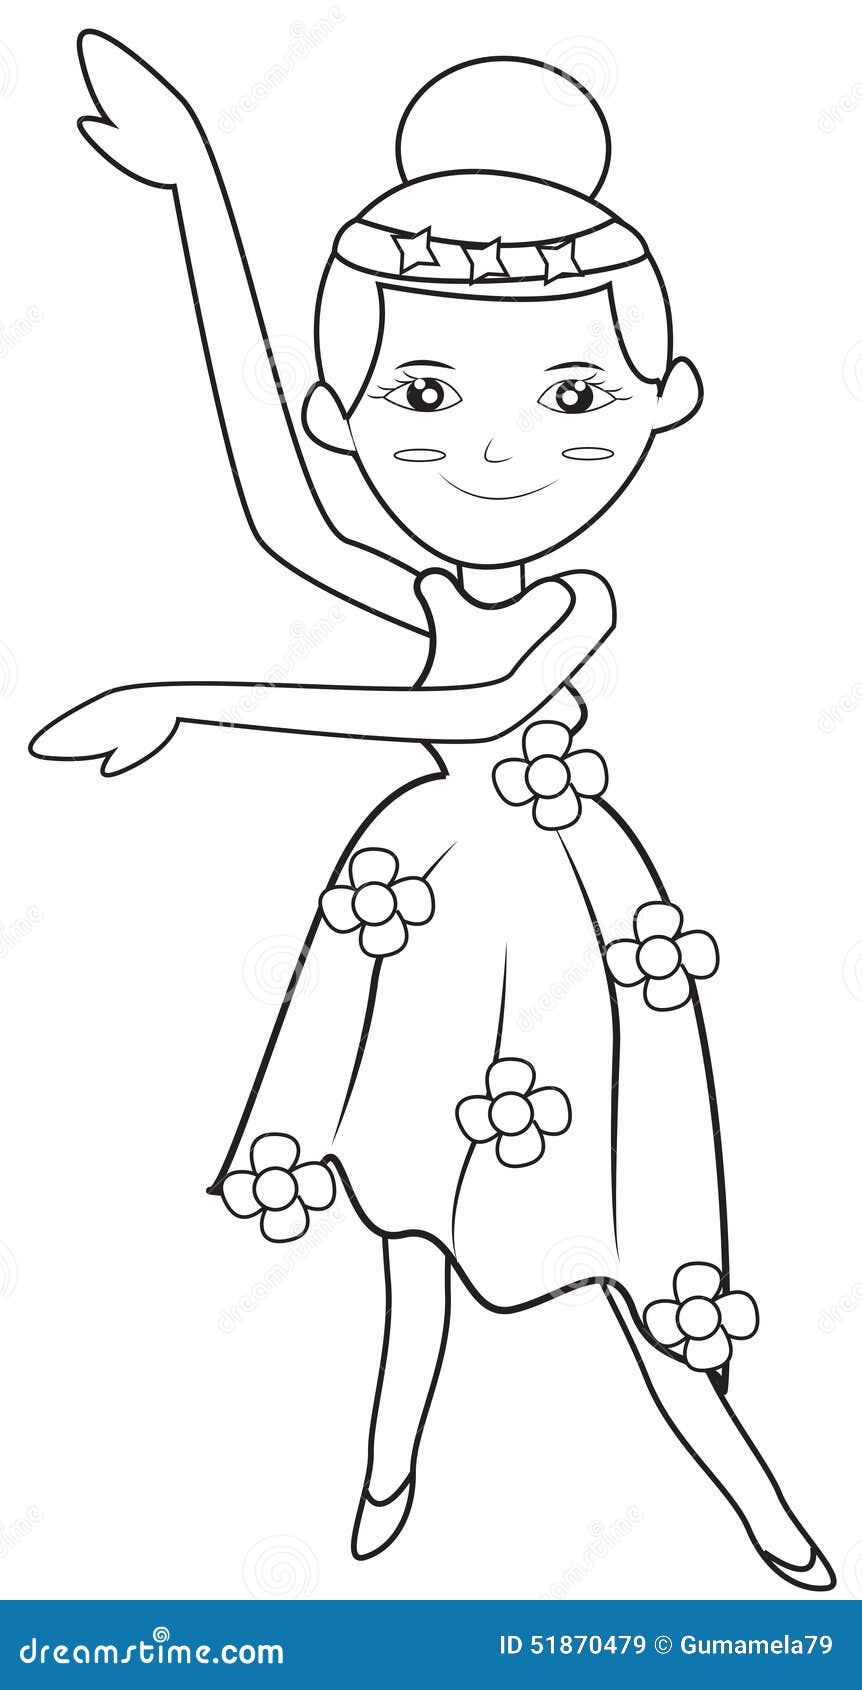 Ballet coloring page stock illustration. Illustration of abstract